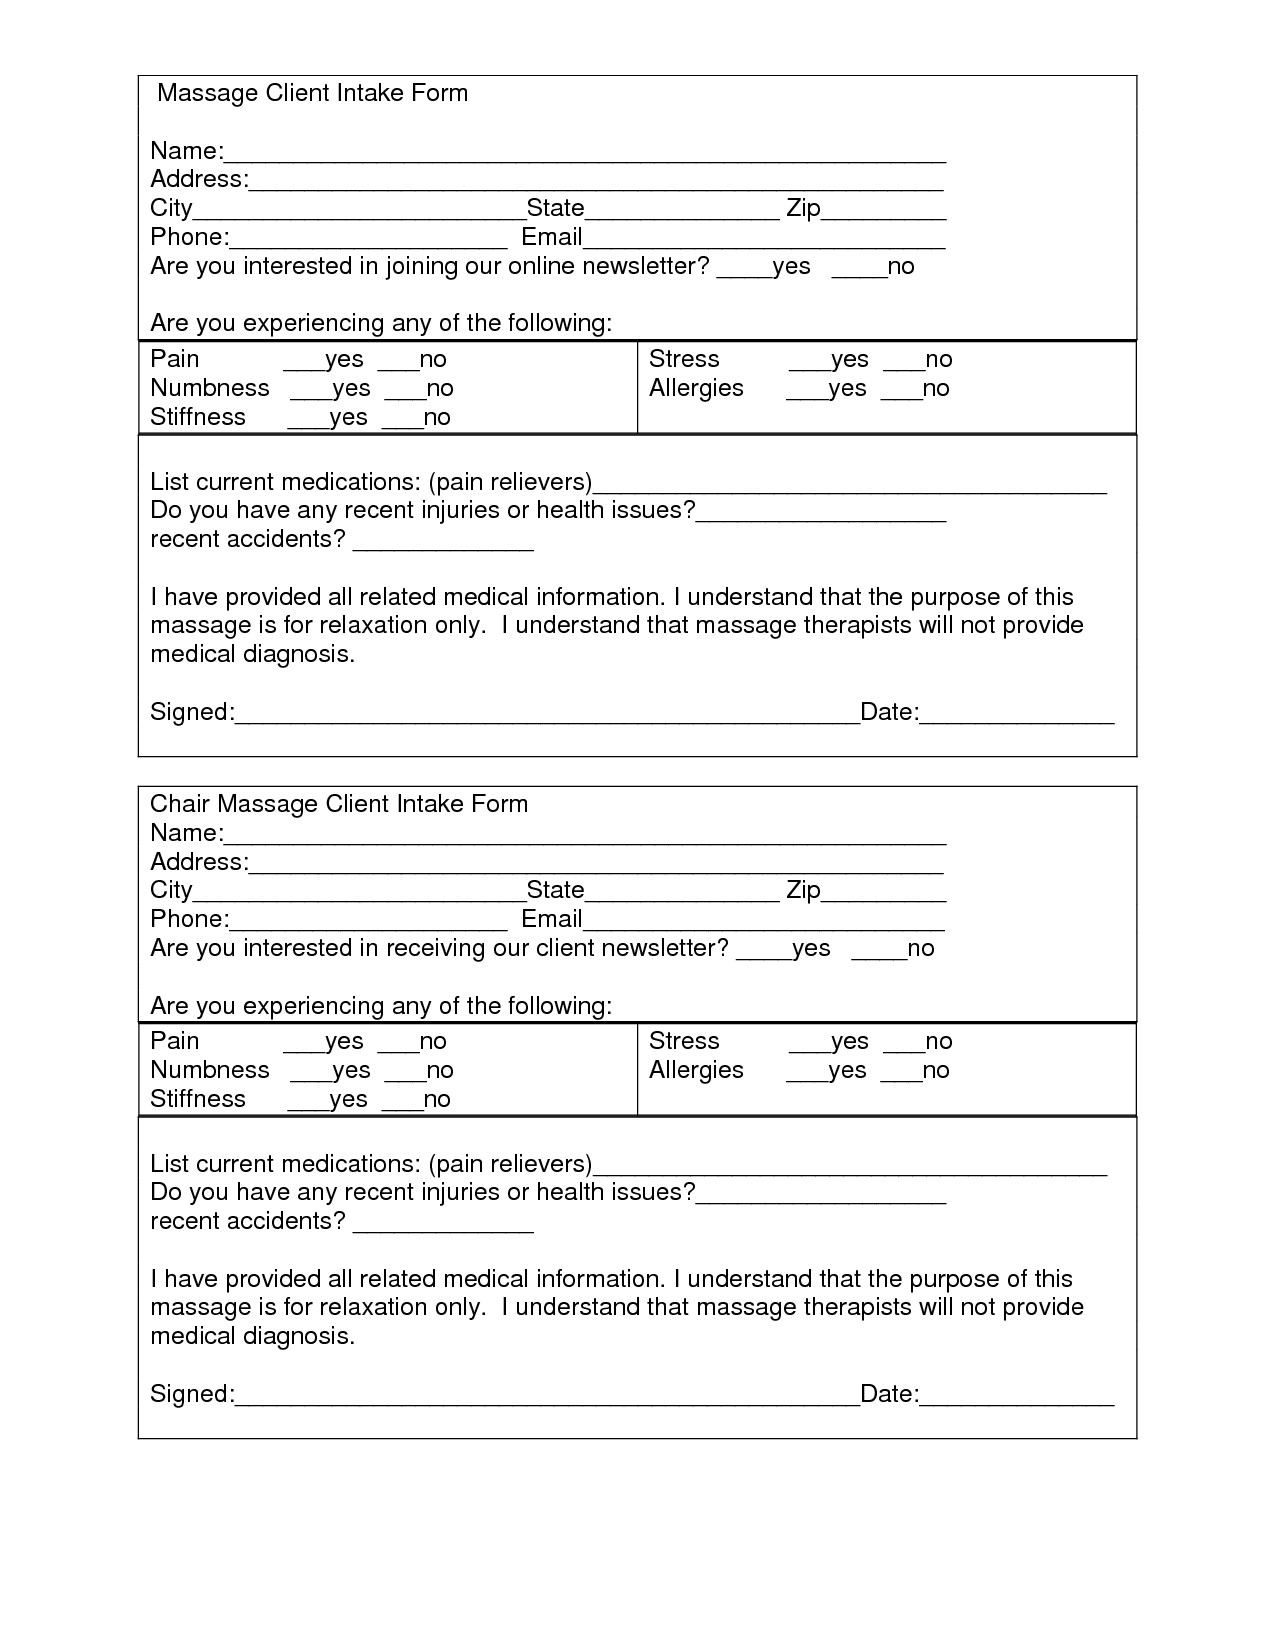 Client Intake form Template Massage Client Intake form Template